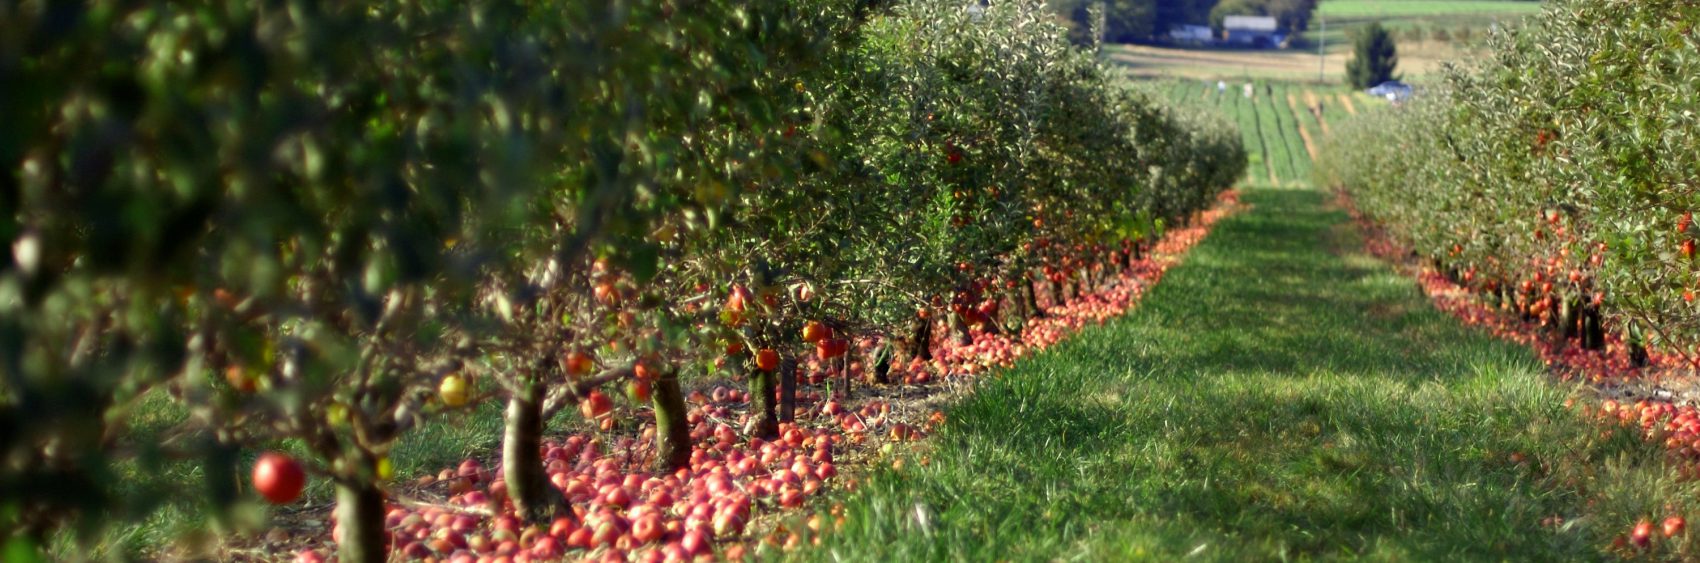 Beautiful rows of apples trees